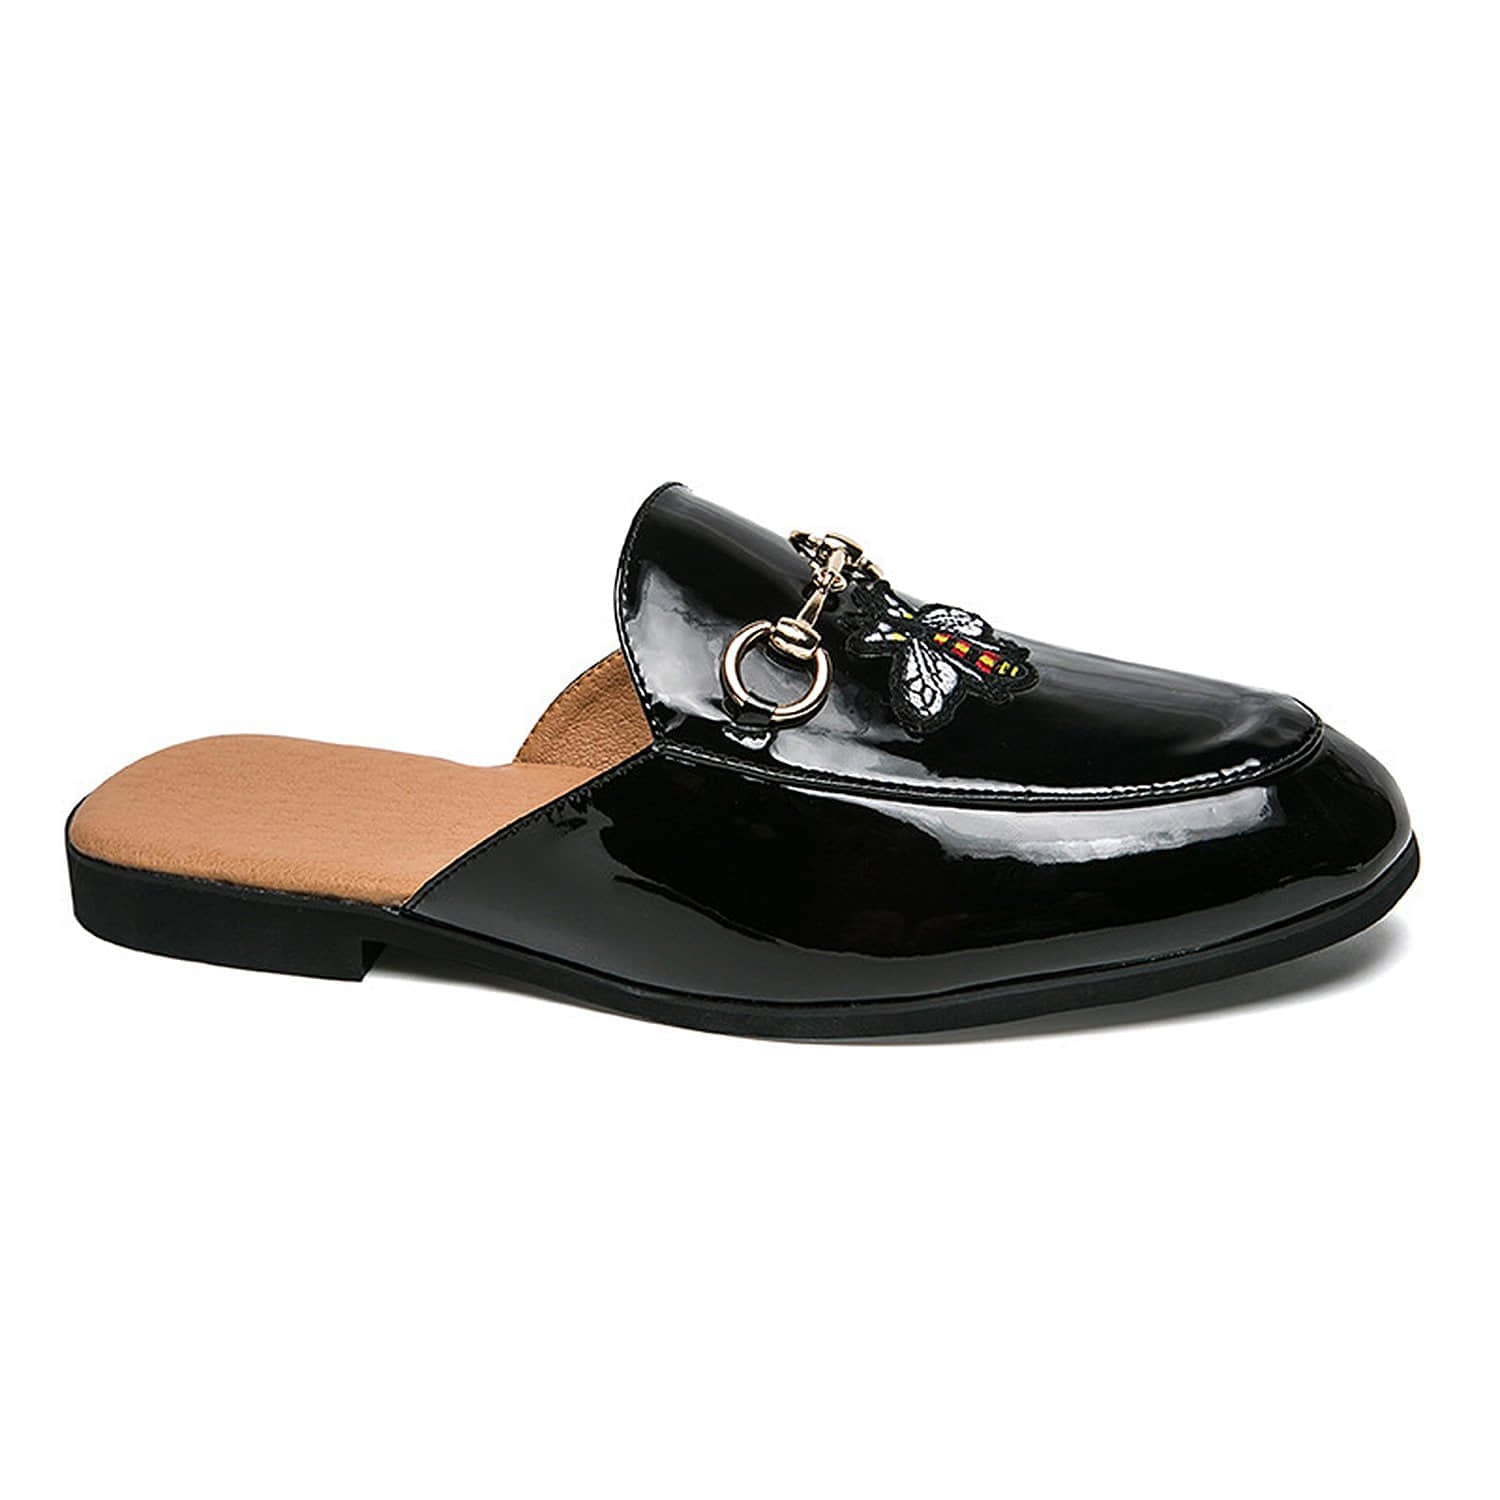 Patent-Leather-Buckle-Slippers-Mules